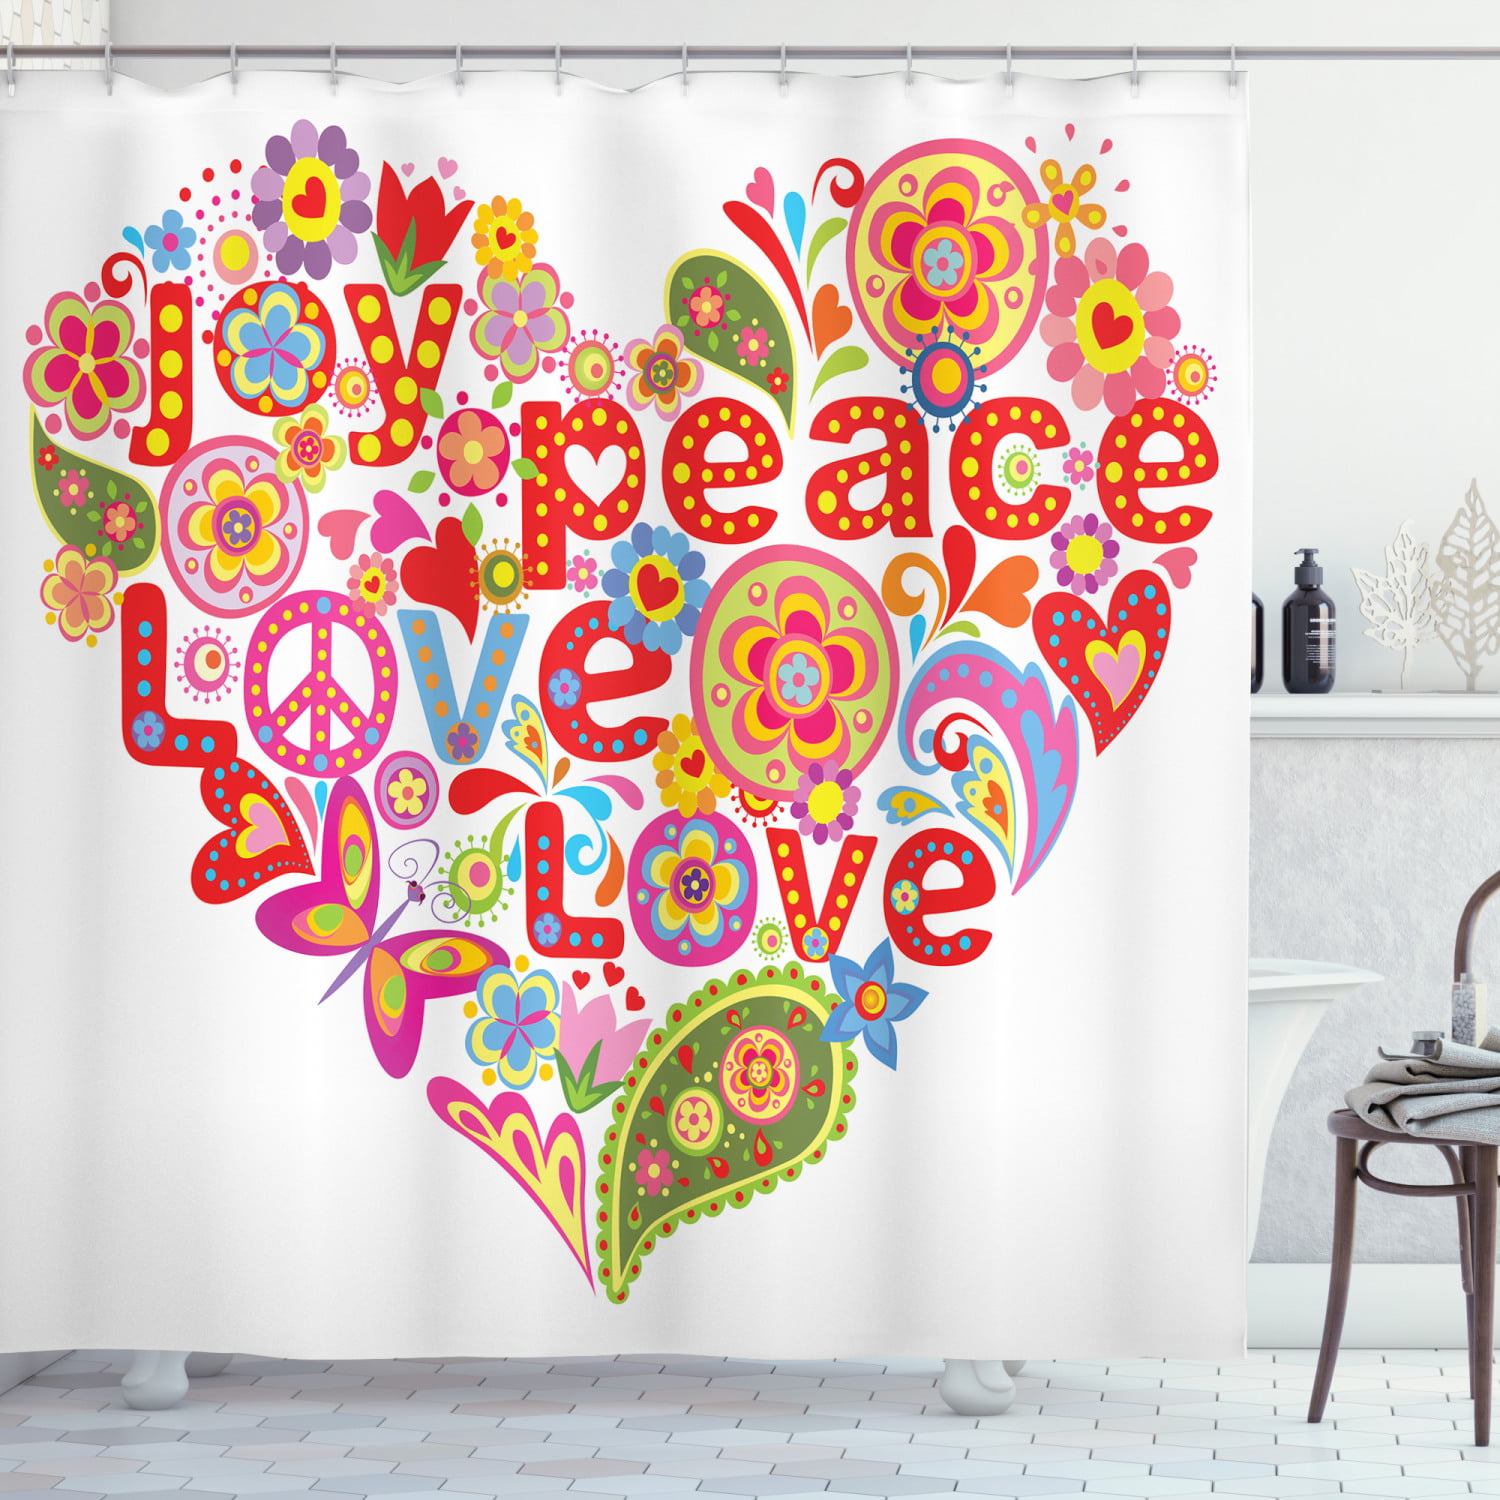 Kids Wall Decals Groovy Doodle Swirls Hearts Stars 3D Wall Stickers Self Adhesive for Home Living Room Bedroom Kitchen 8 x 11 Inch